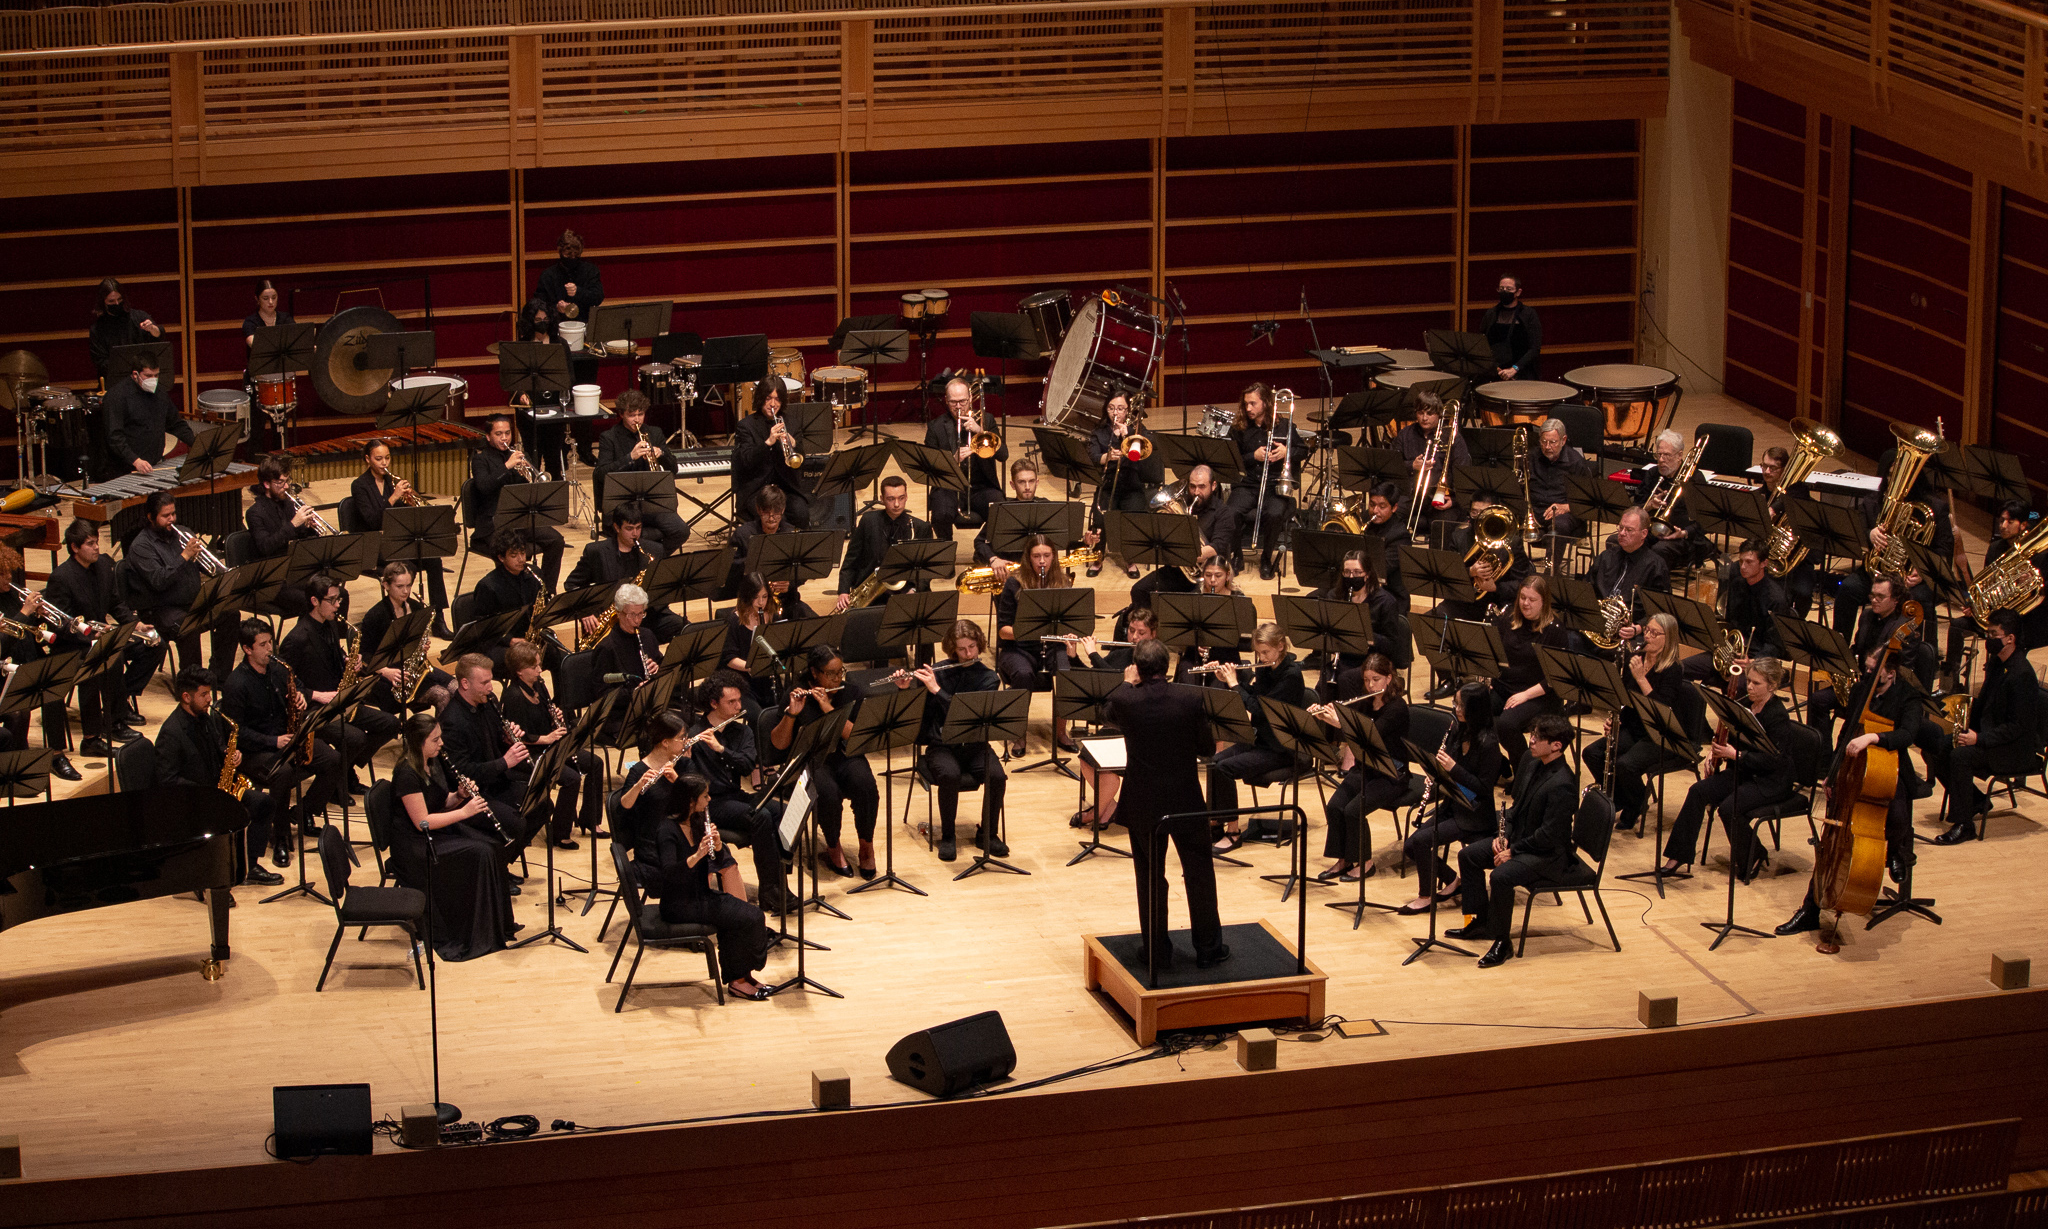 Wind Ensemble playing on stage